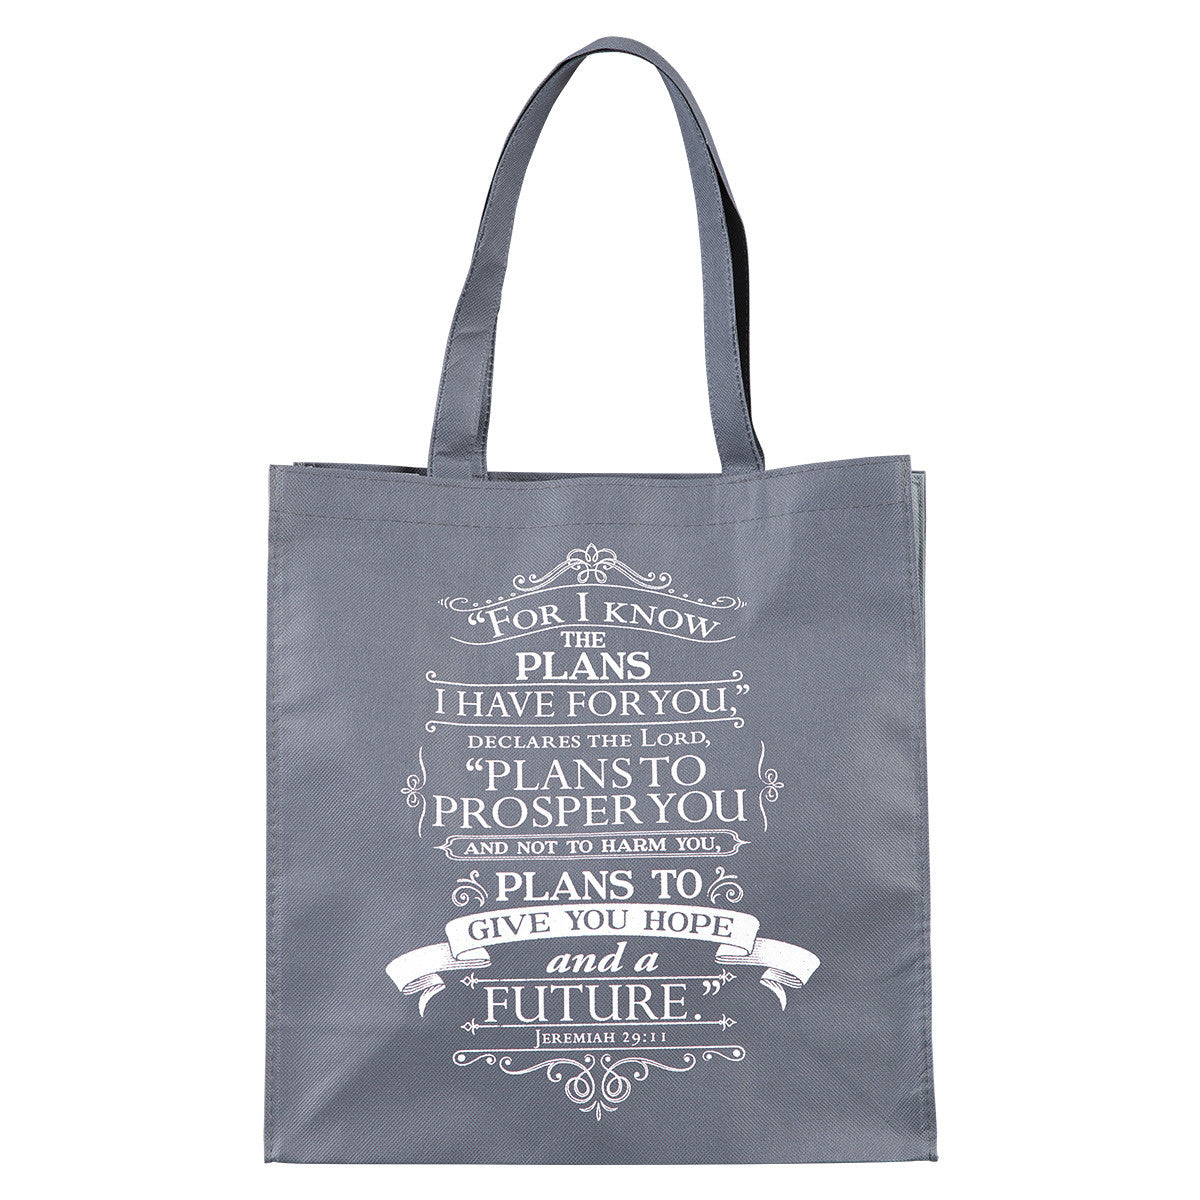 For I Know the Plans Tote Shopping Bag Jeremiah 29:11 - The Christian Gift Company